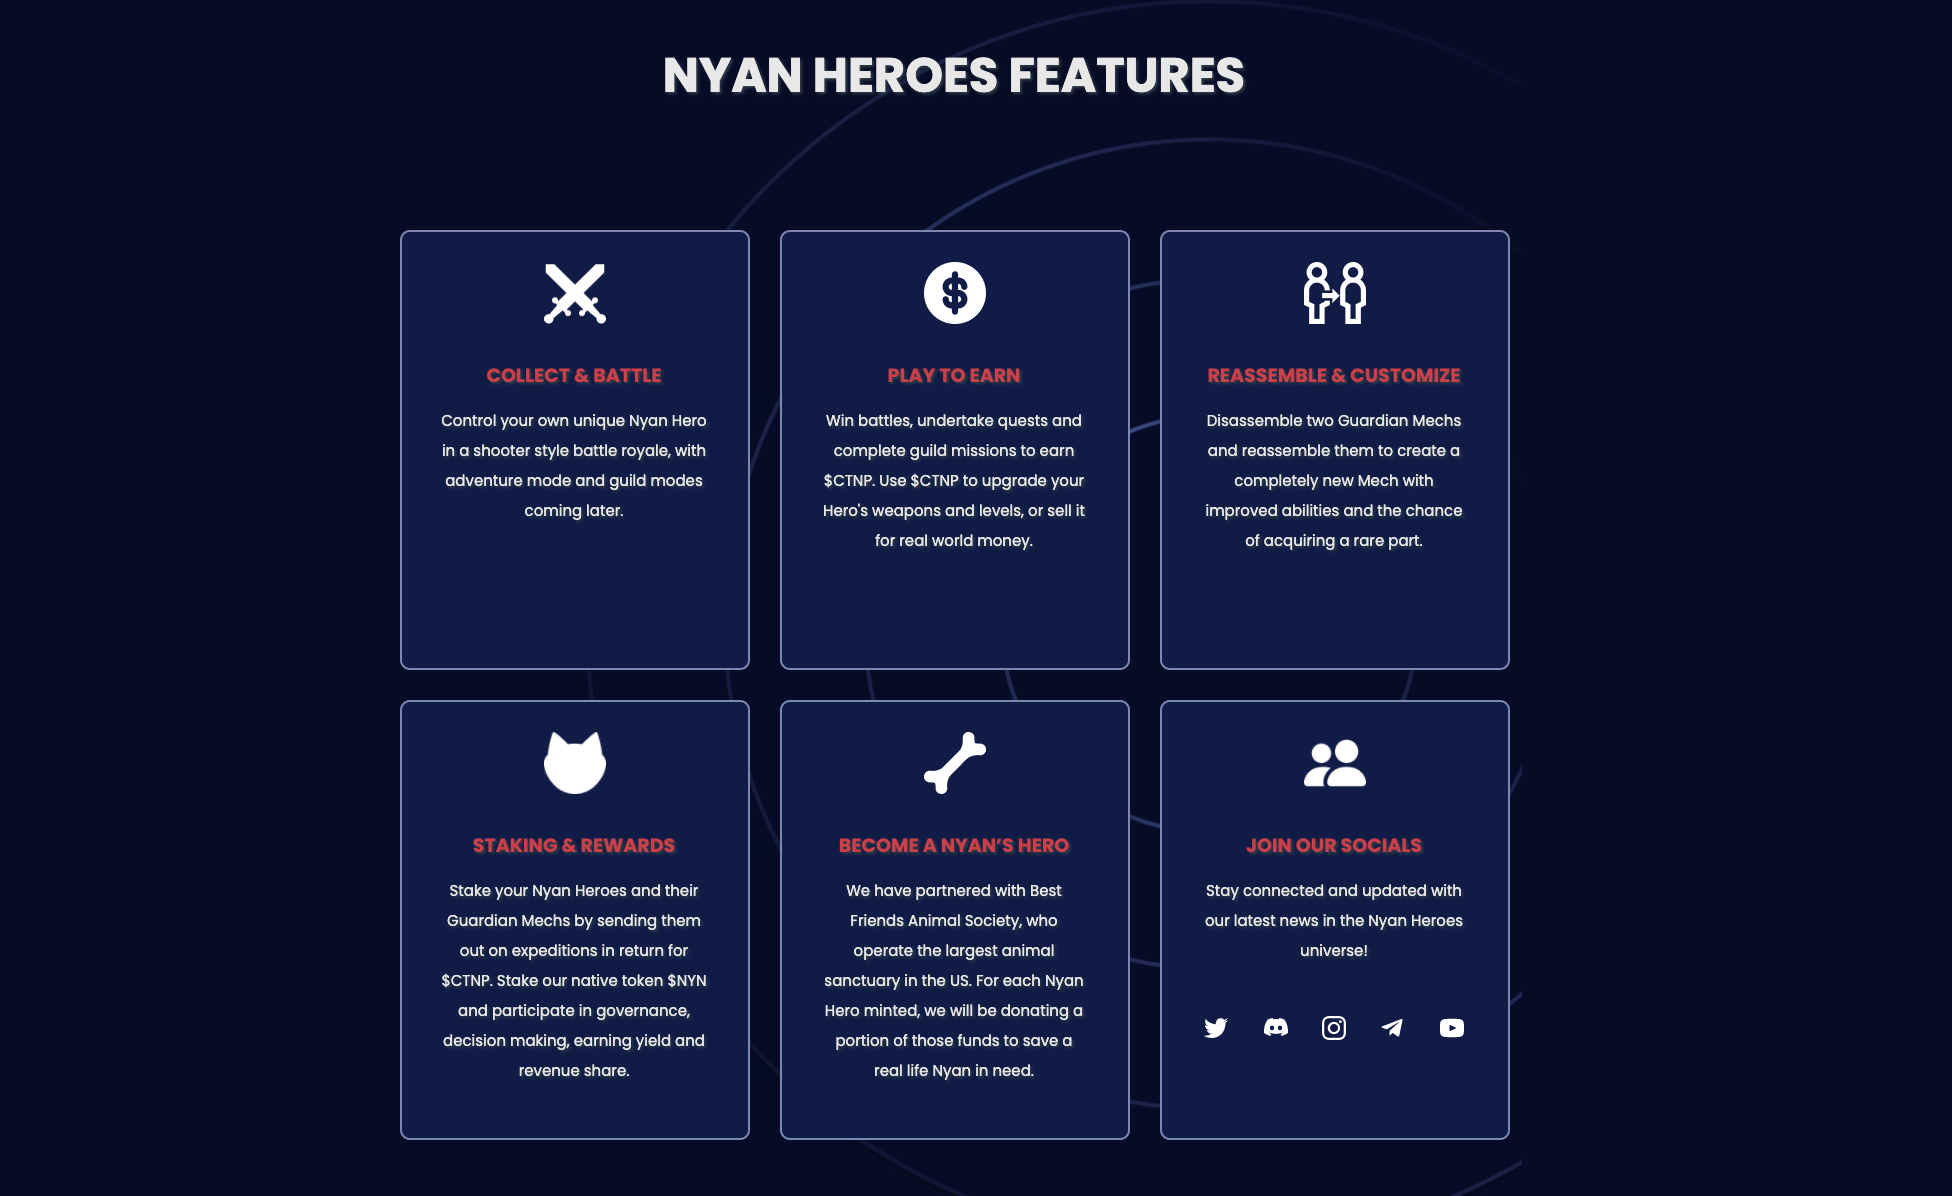 Nyan Heroes Features